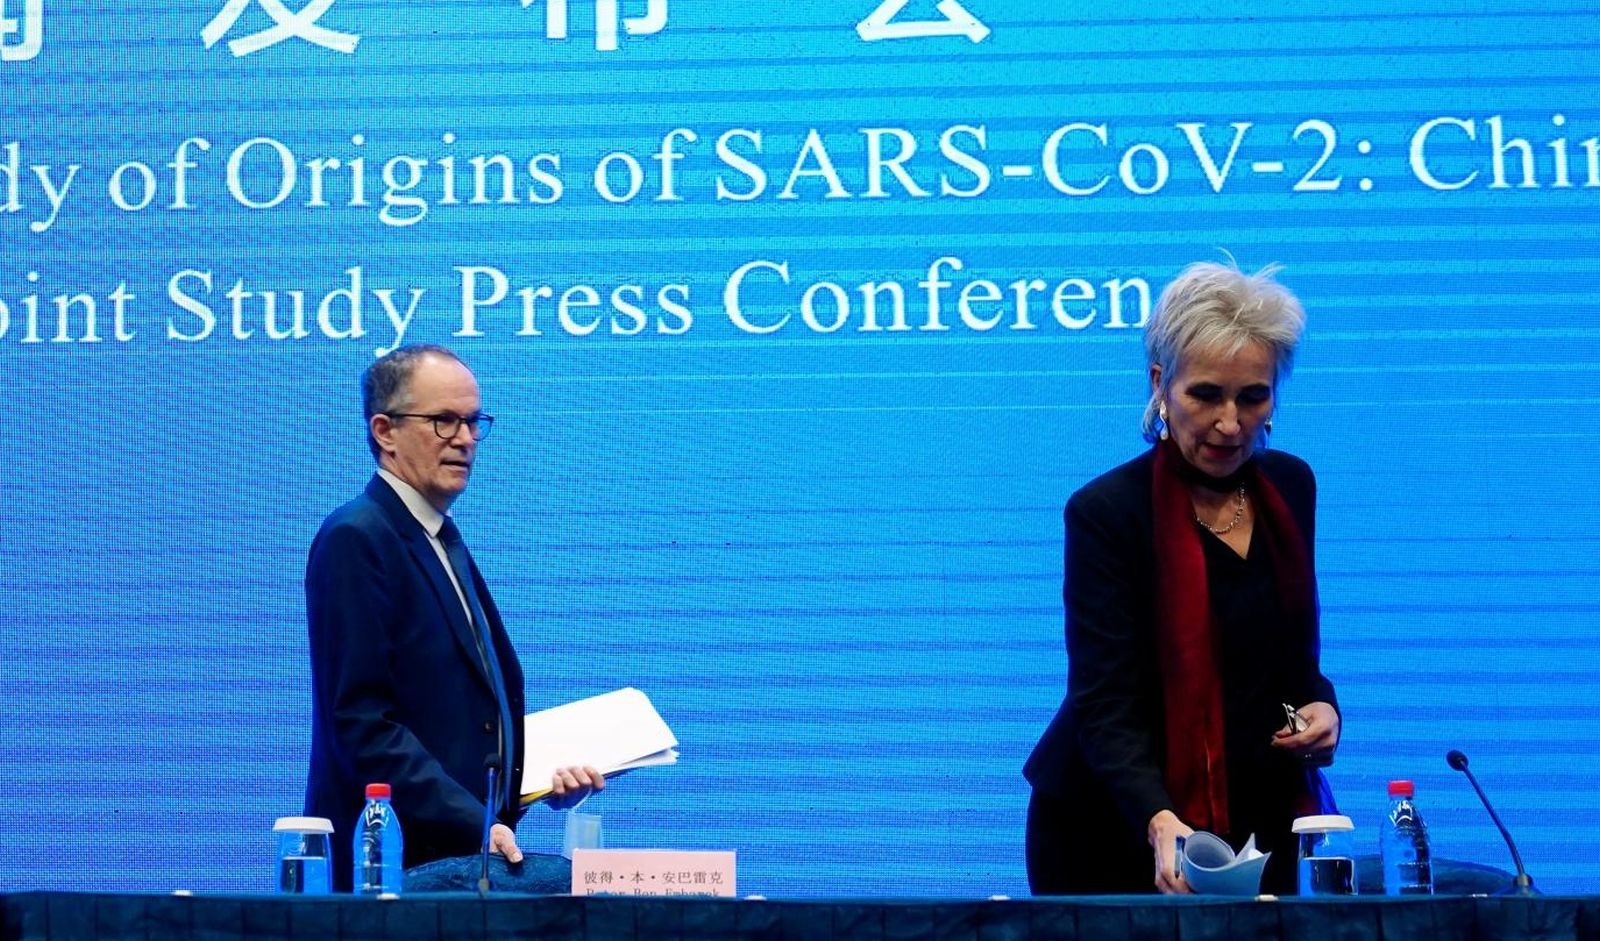 FILE PHOTO: WHO team at a news conference in Wuhan FILE PHOTO: Peter Ben Embarek and Marion Koopmans, members of the World Health Organization (WHO) team tasked with investigating the origins of the coronavirus disease (COVID-19), arrive for the WHO-China joint study news conference at a hotel in Wuhan, Hubei province, China February 9, 2021. REUTERS/Aly Song/File Photo Aly Song